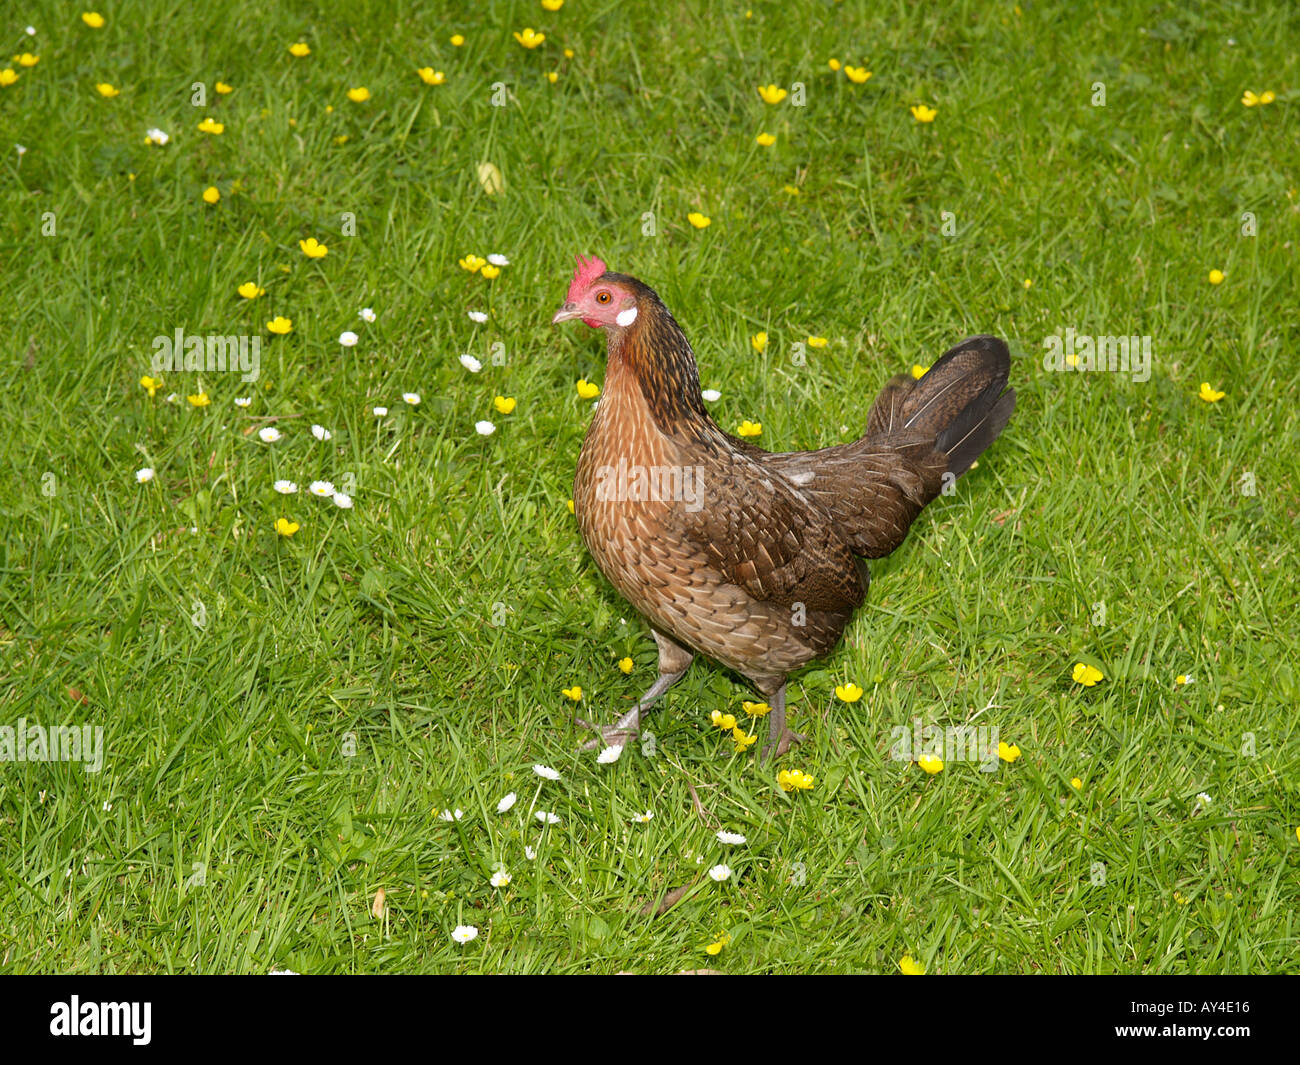 Chicken walking through a grass field with little yellow and white flowers Stock Photo